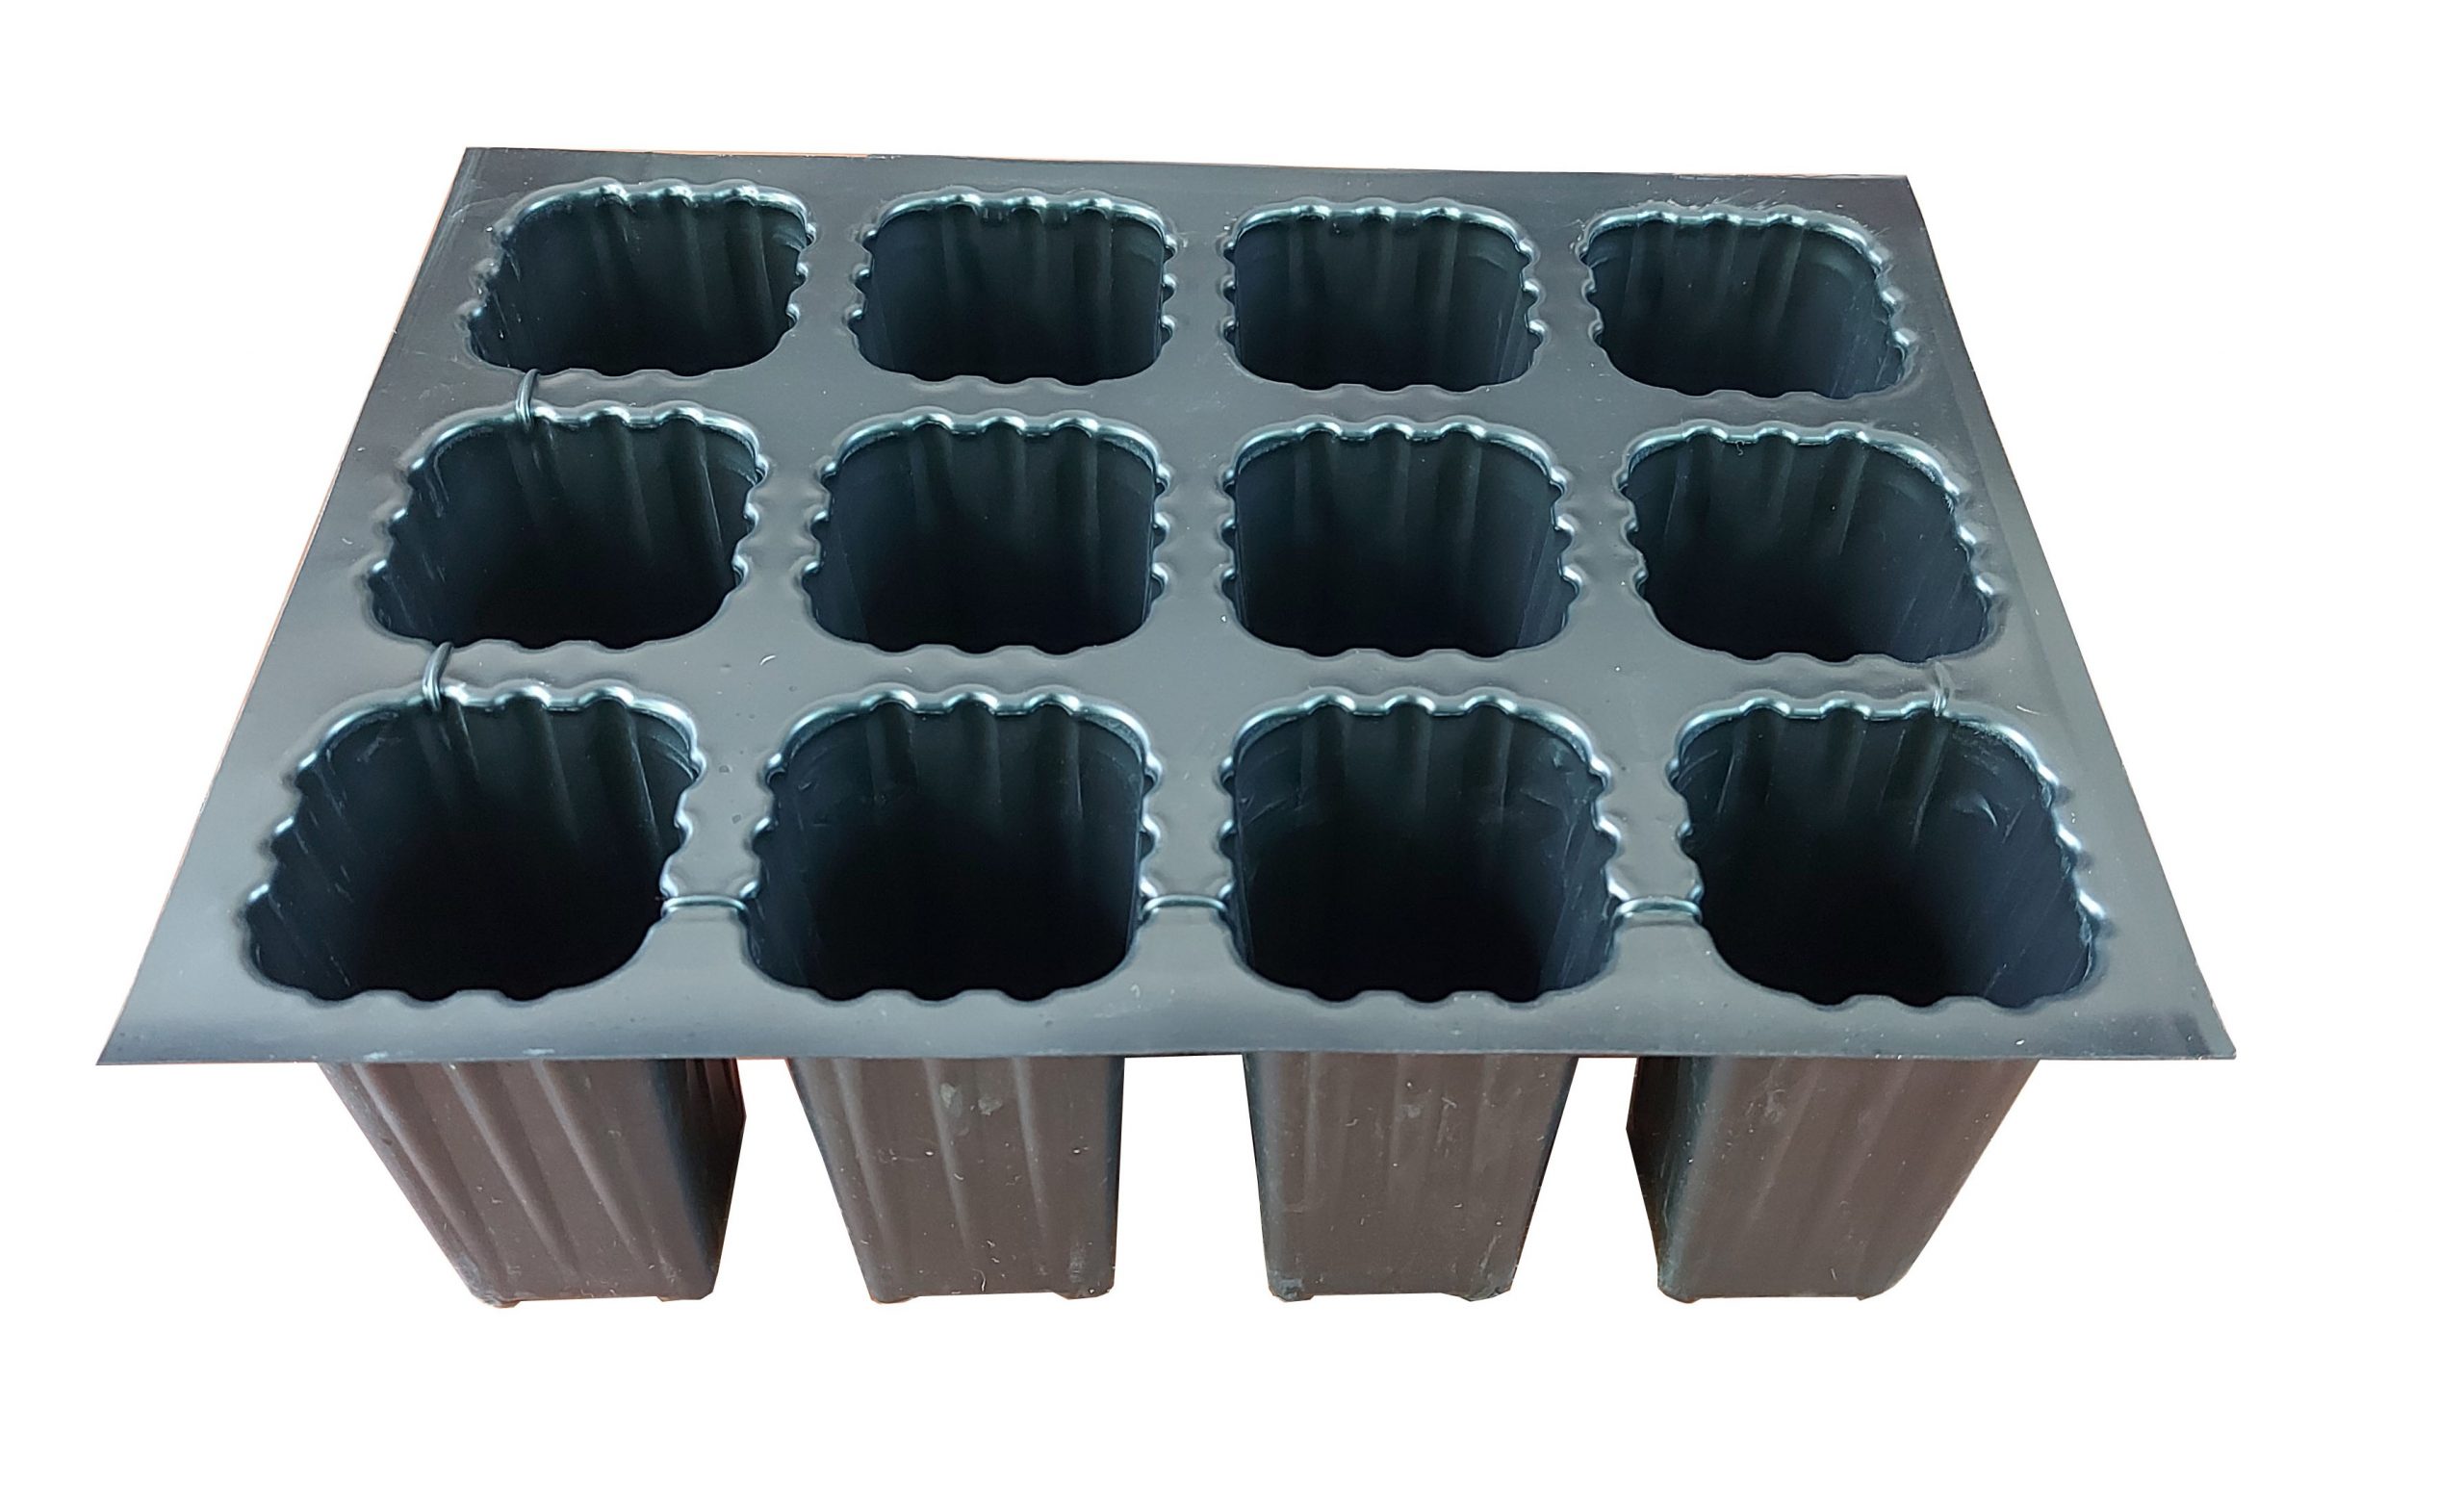 12 Cavity Seedling tray, 12 cell seedling tray